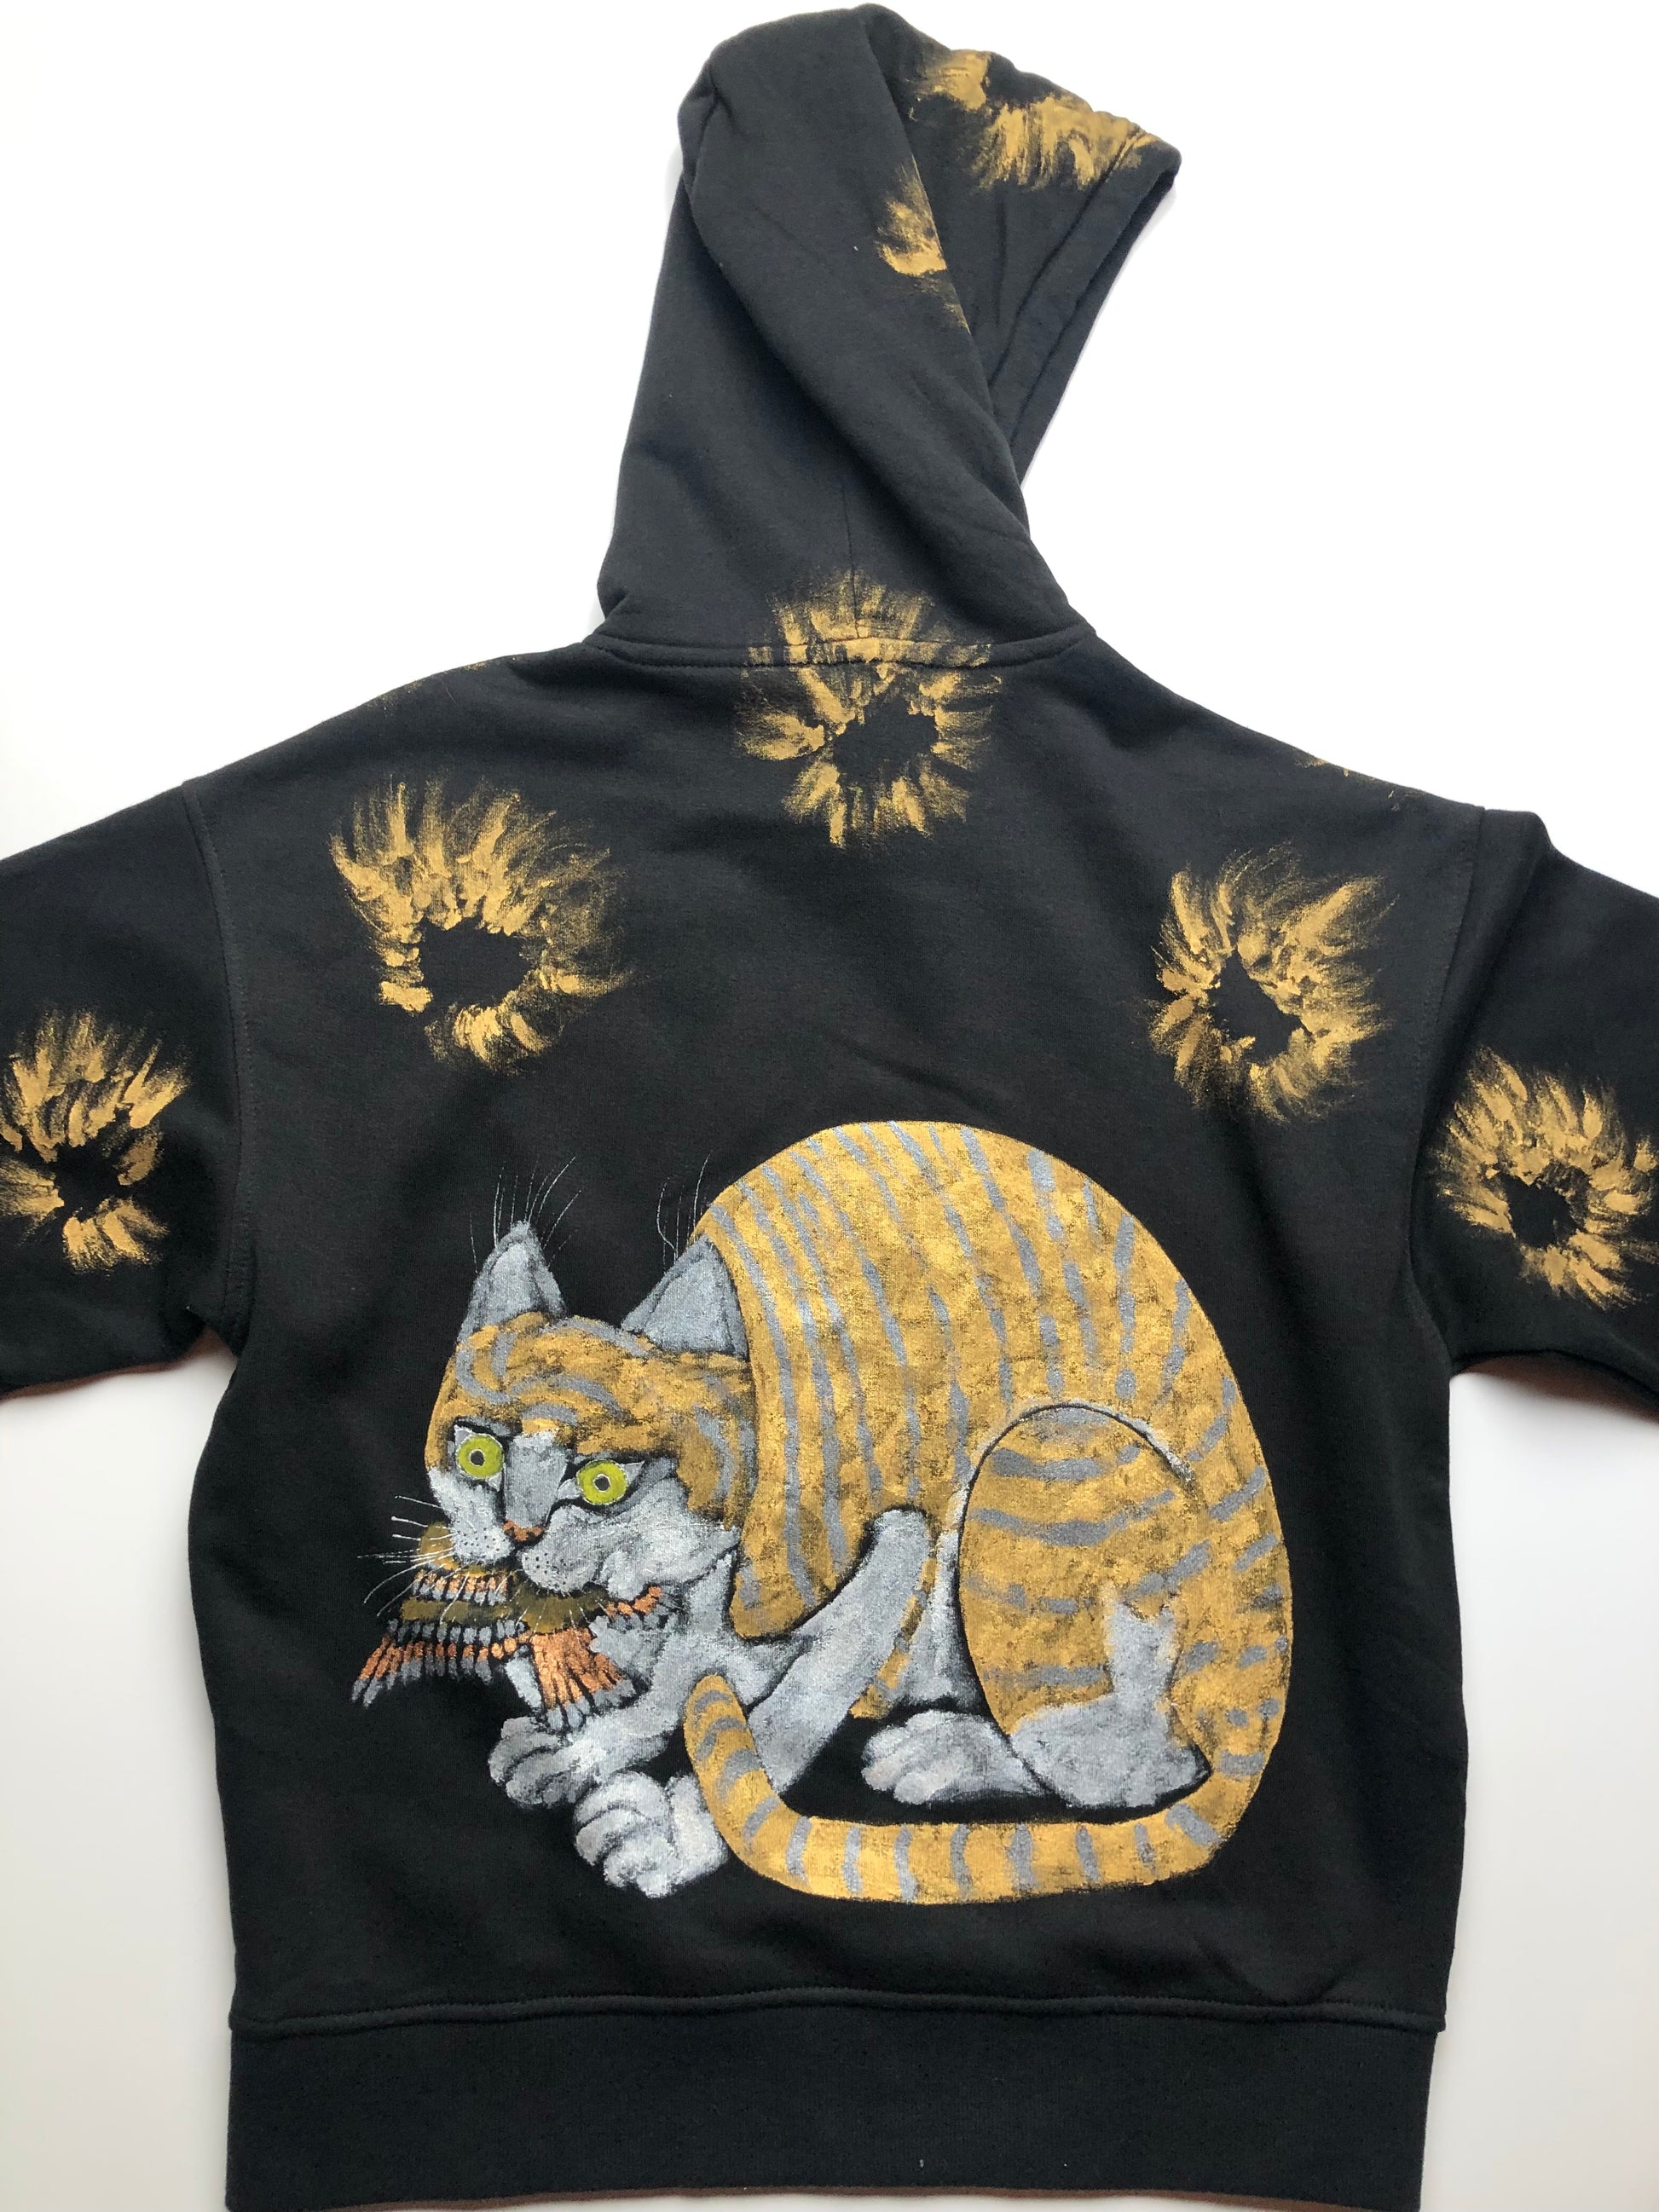 Women's hoodie raven back with cat pattern